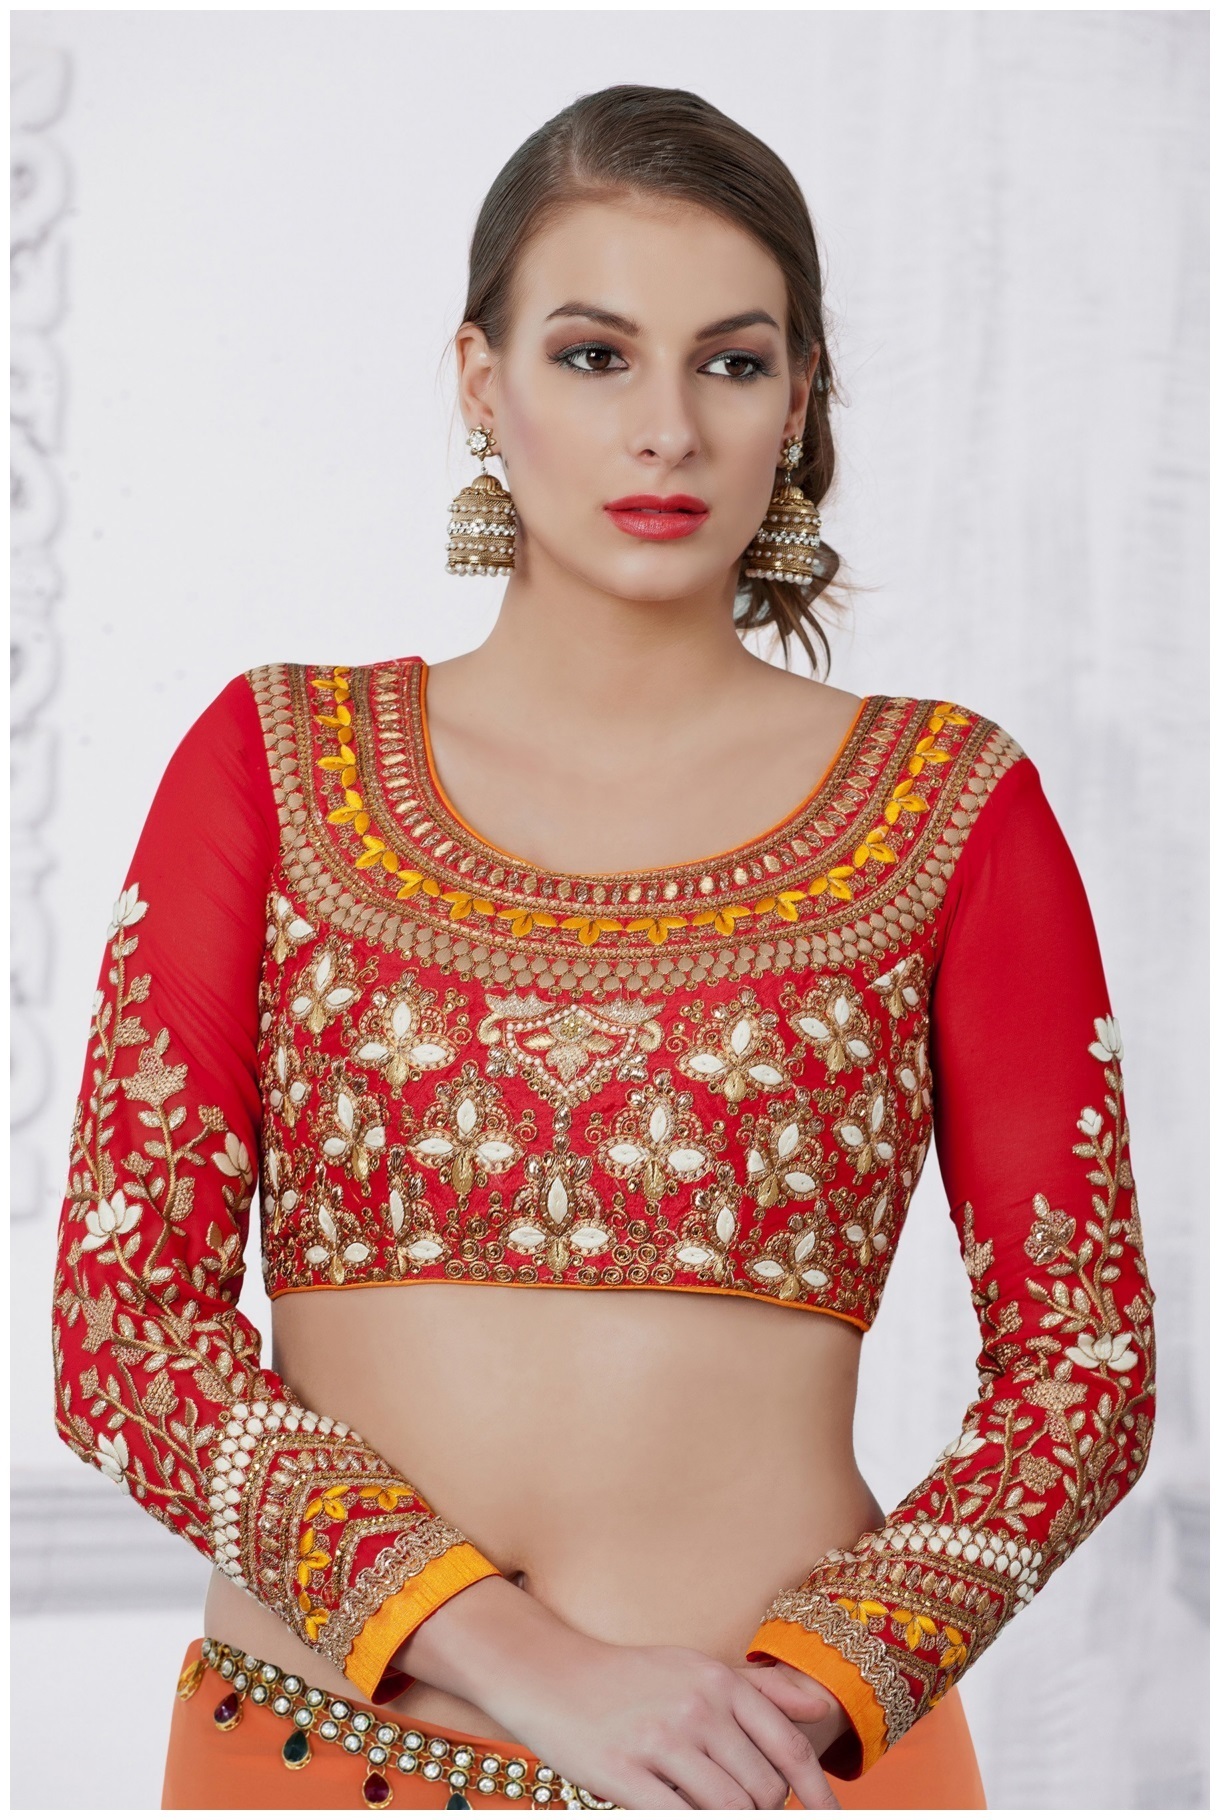 Reddish Blouse Neck Designs With Patch Work